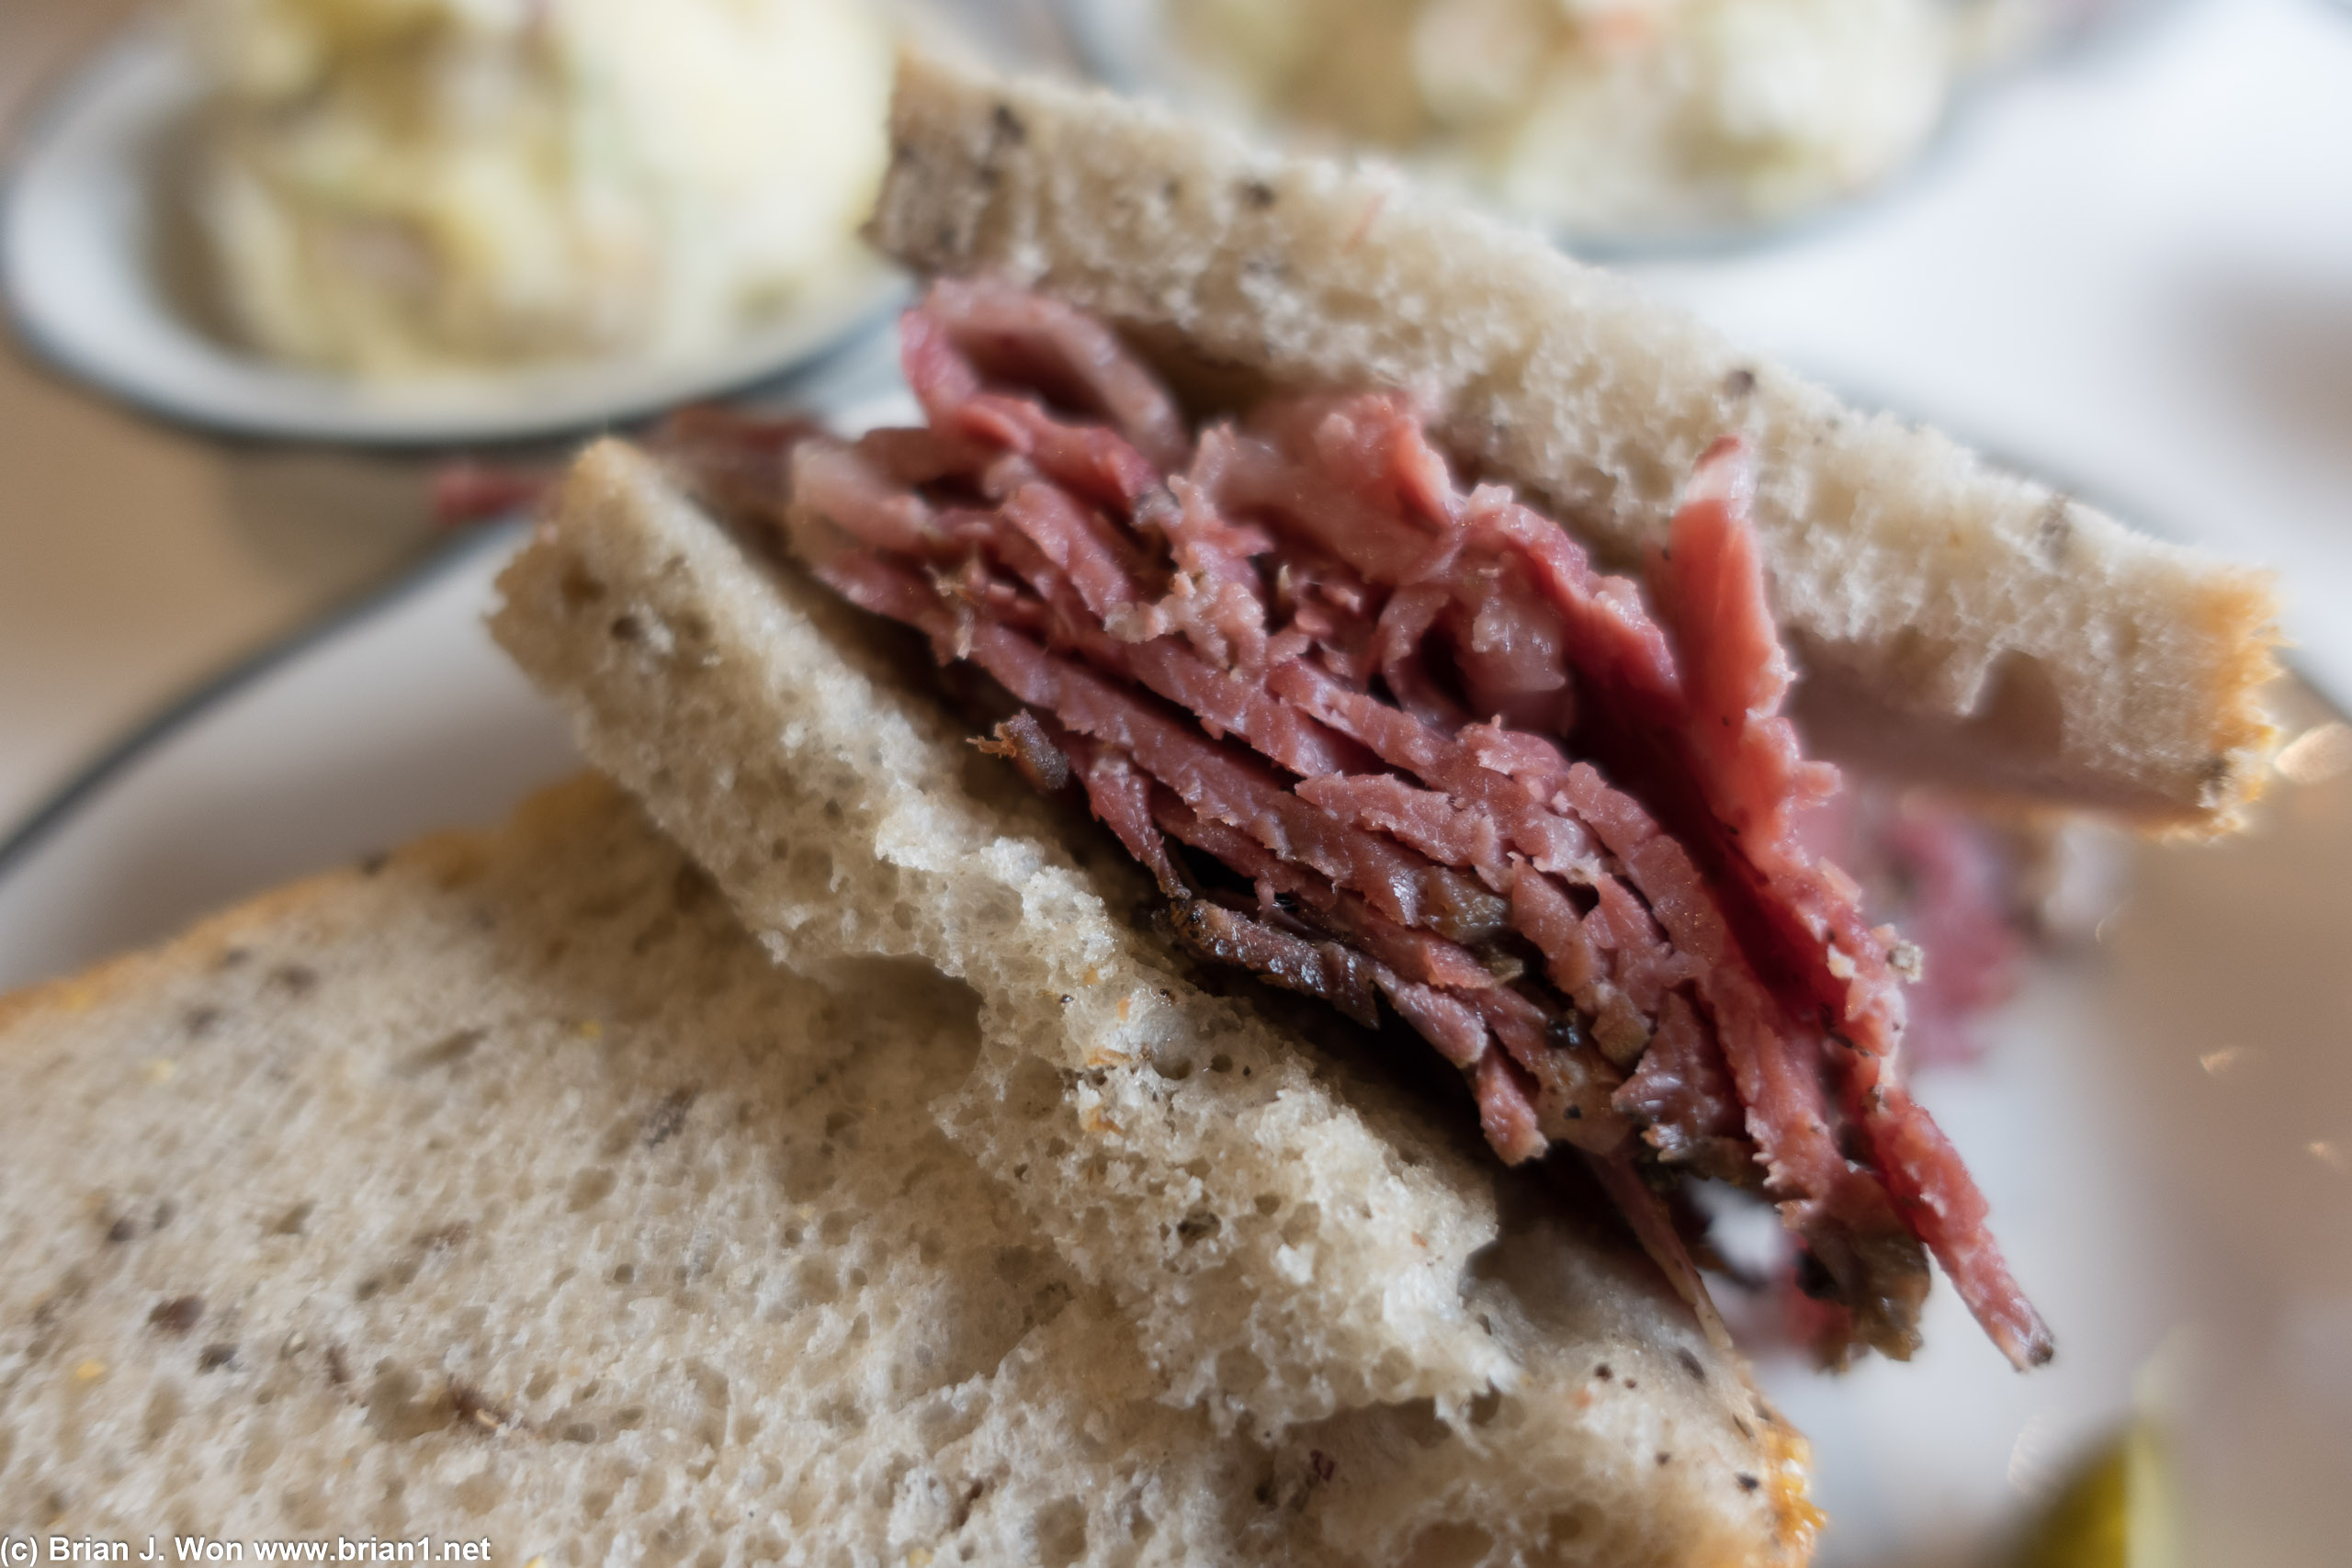 The purist-- just pastrami.